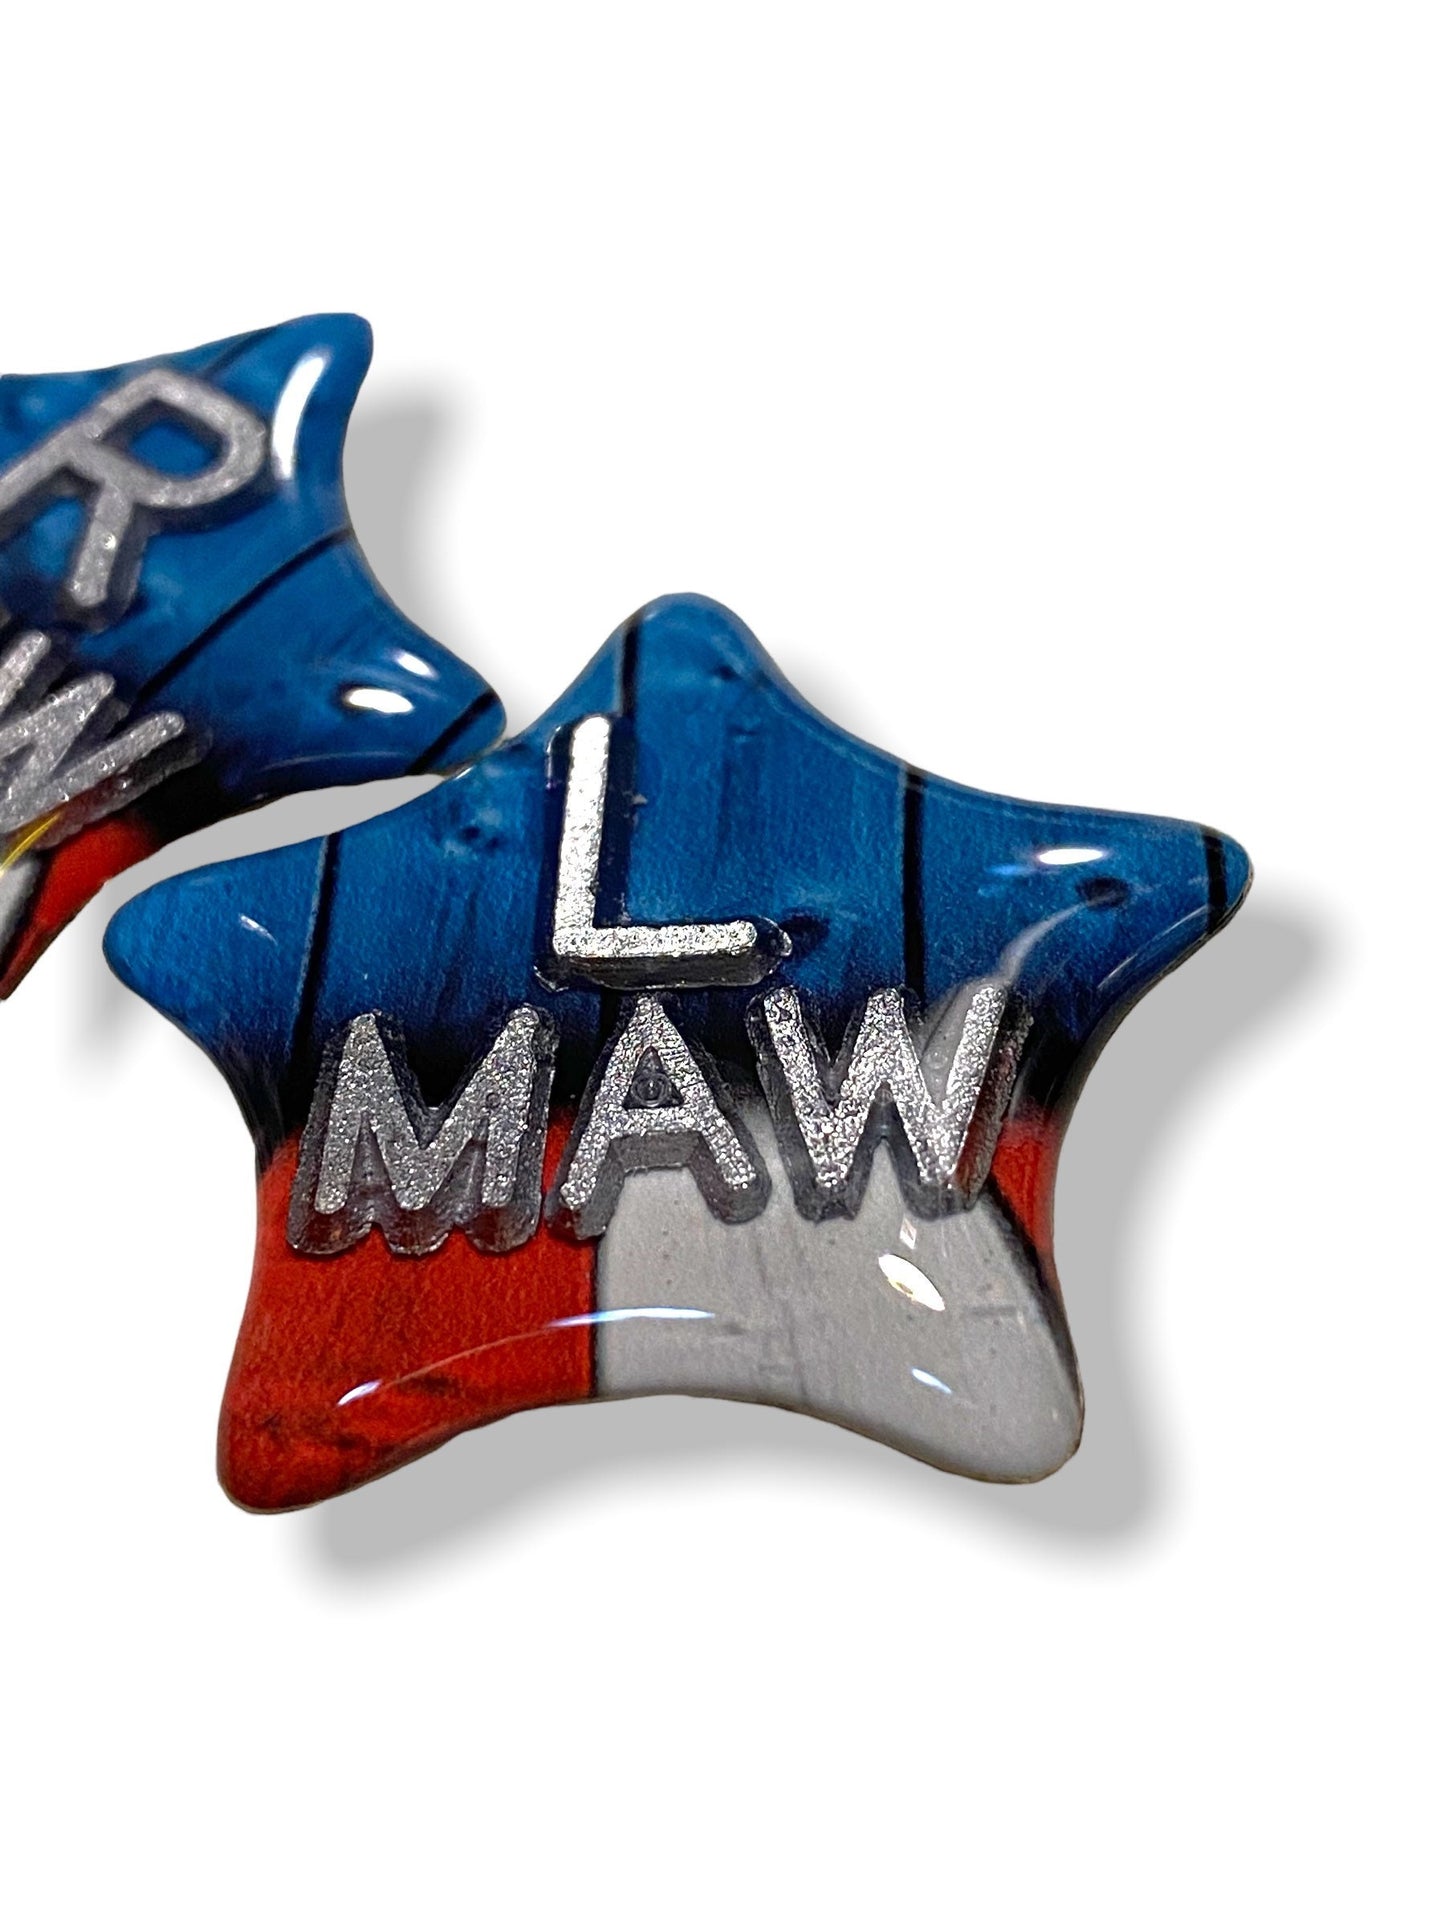 Red White and Blue American Star Xray Markers Customized with Initials